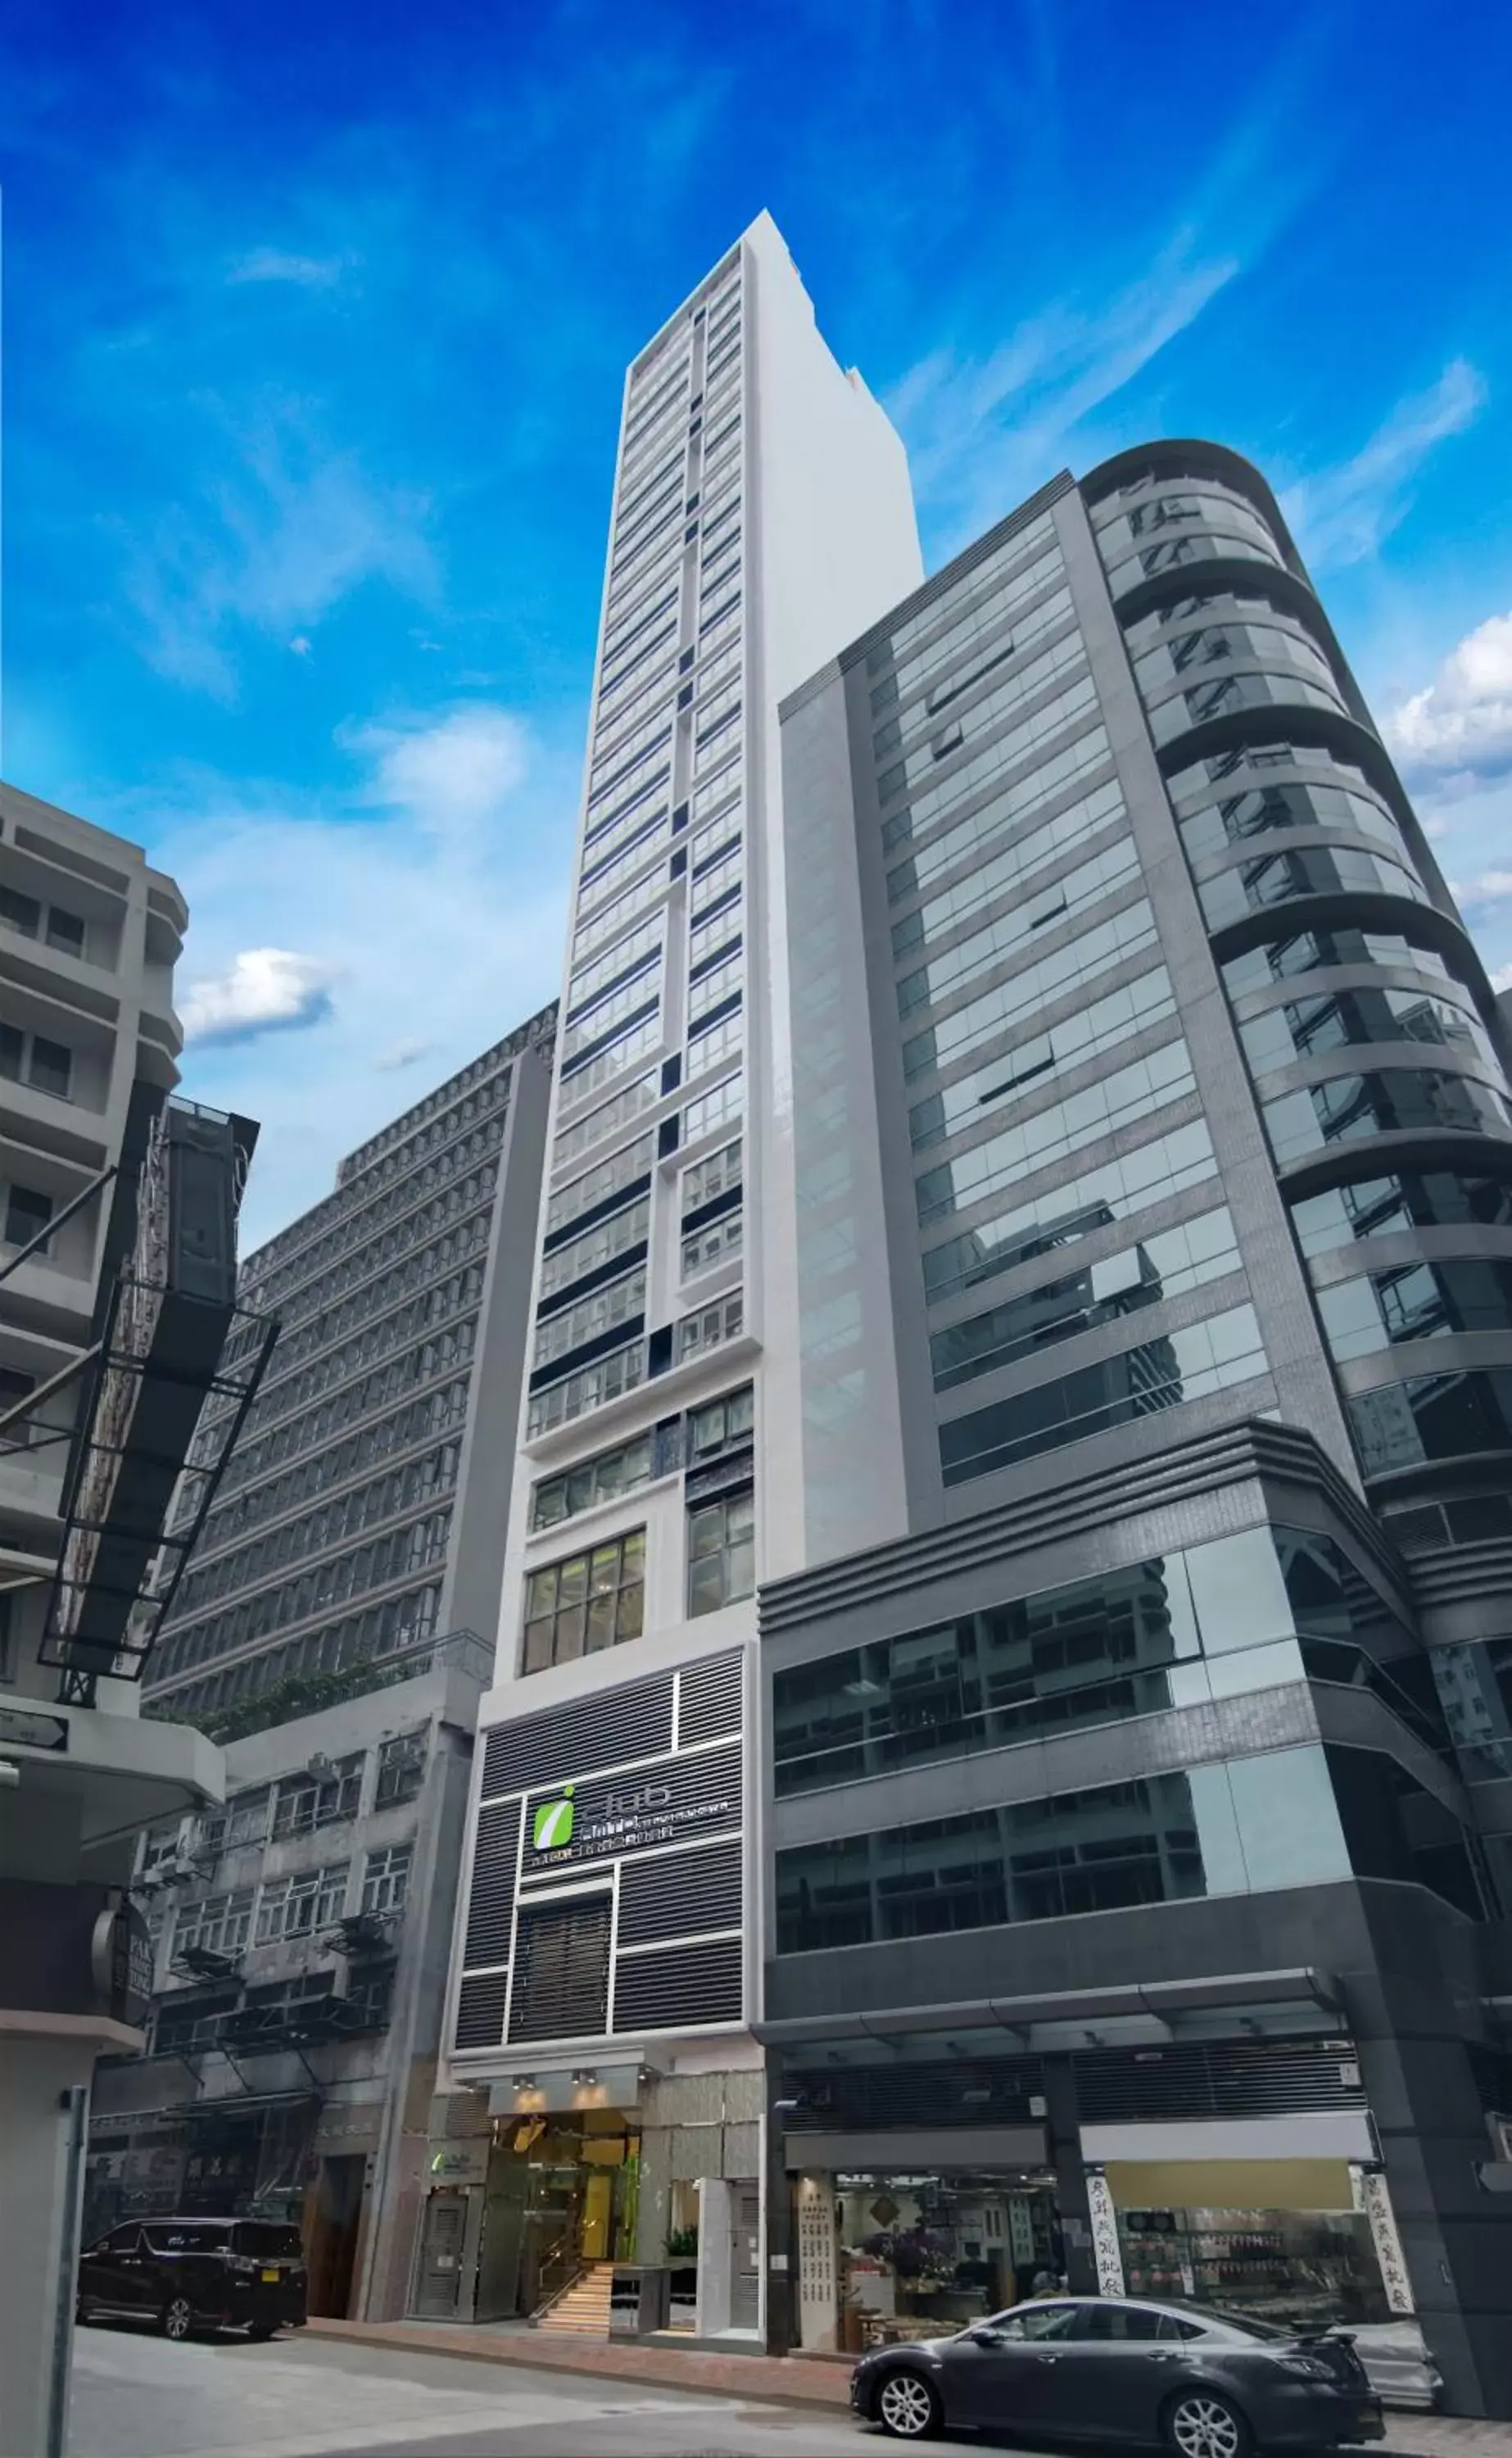 Property building in iclub AMTD Sheung Wan Hotel